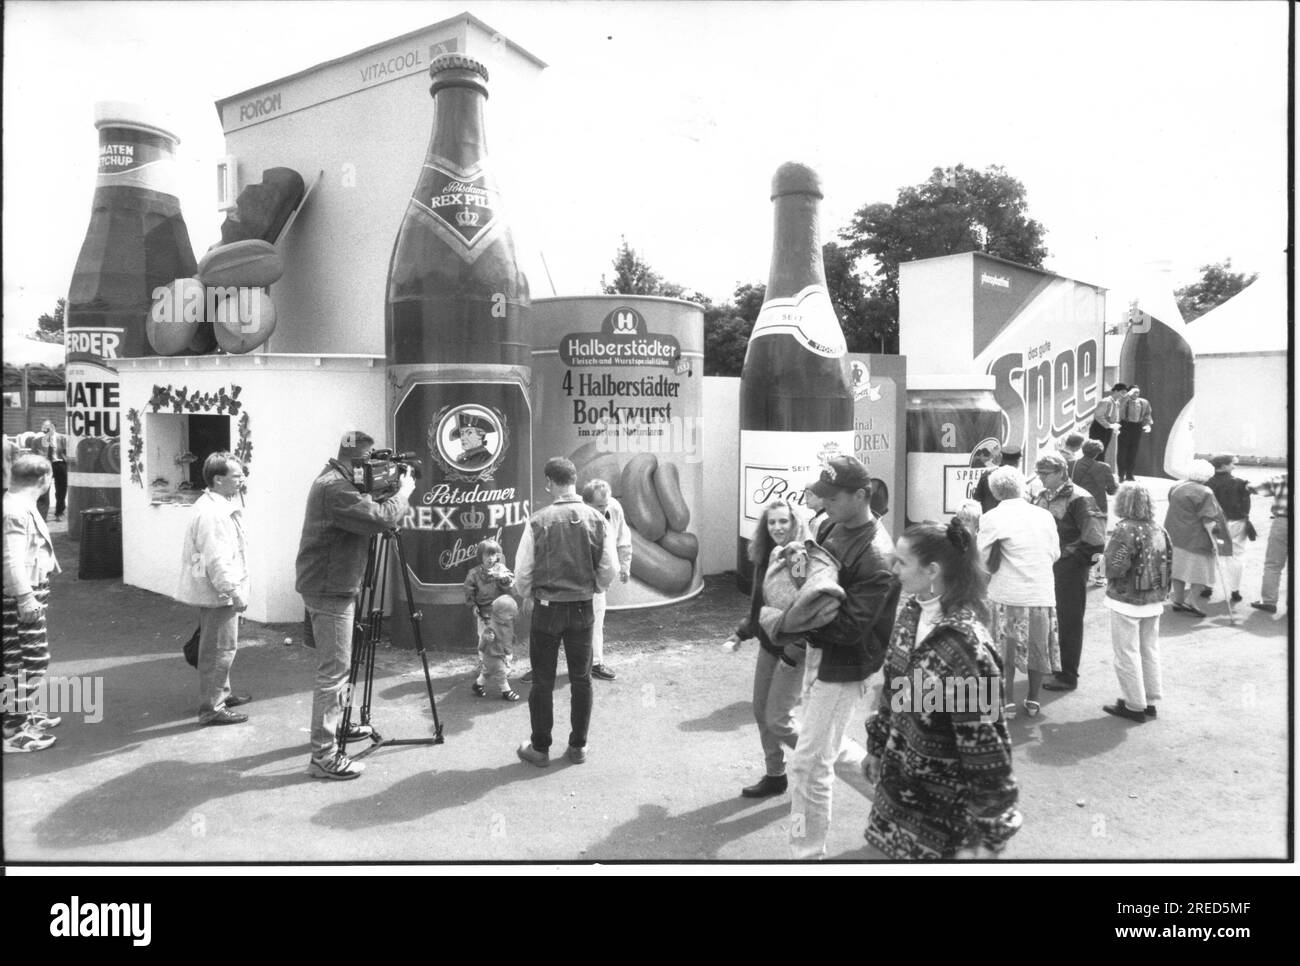 Studiotour Babelsberg and Treuhand jointly present nearly 100 primarily East German companies on the Filmpark grounds. Exhibition. Photo:MAZ/ Bernd Gartenschläger, 15.08.1994 [automated translation] Stock Photo